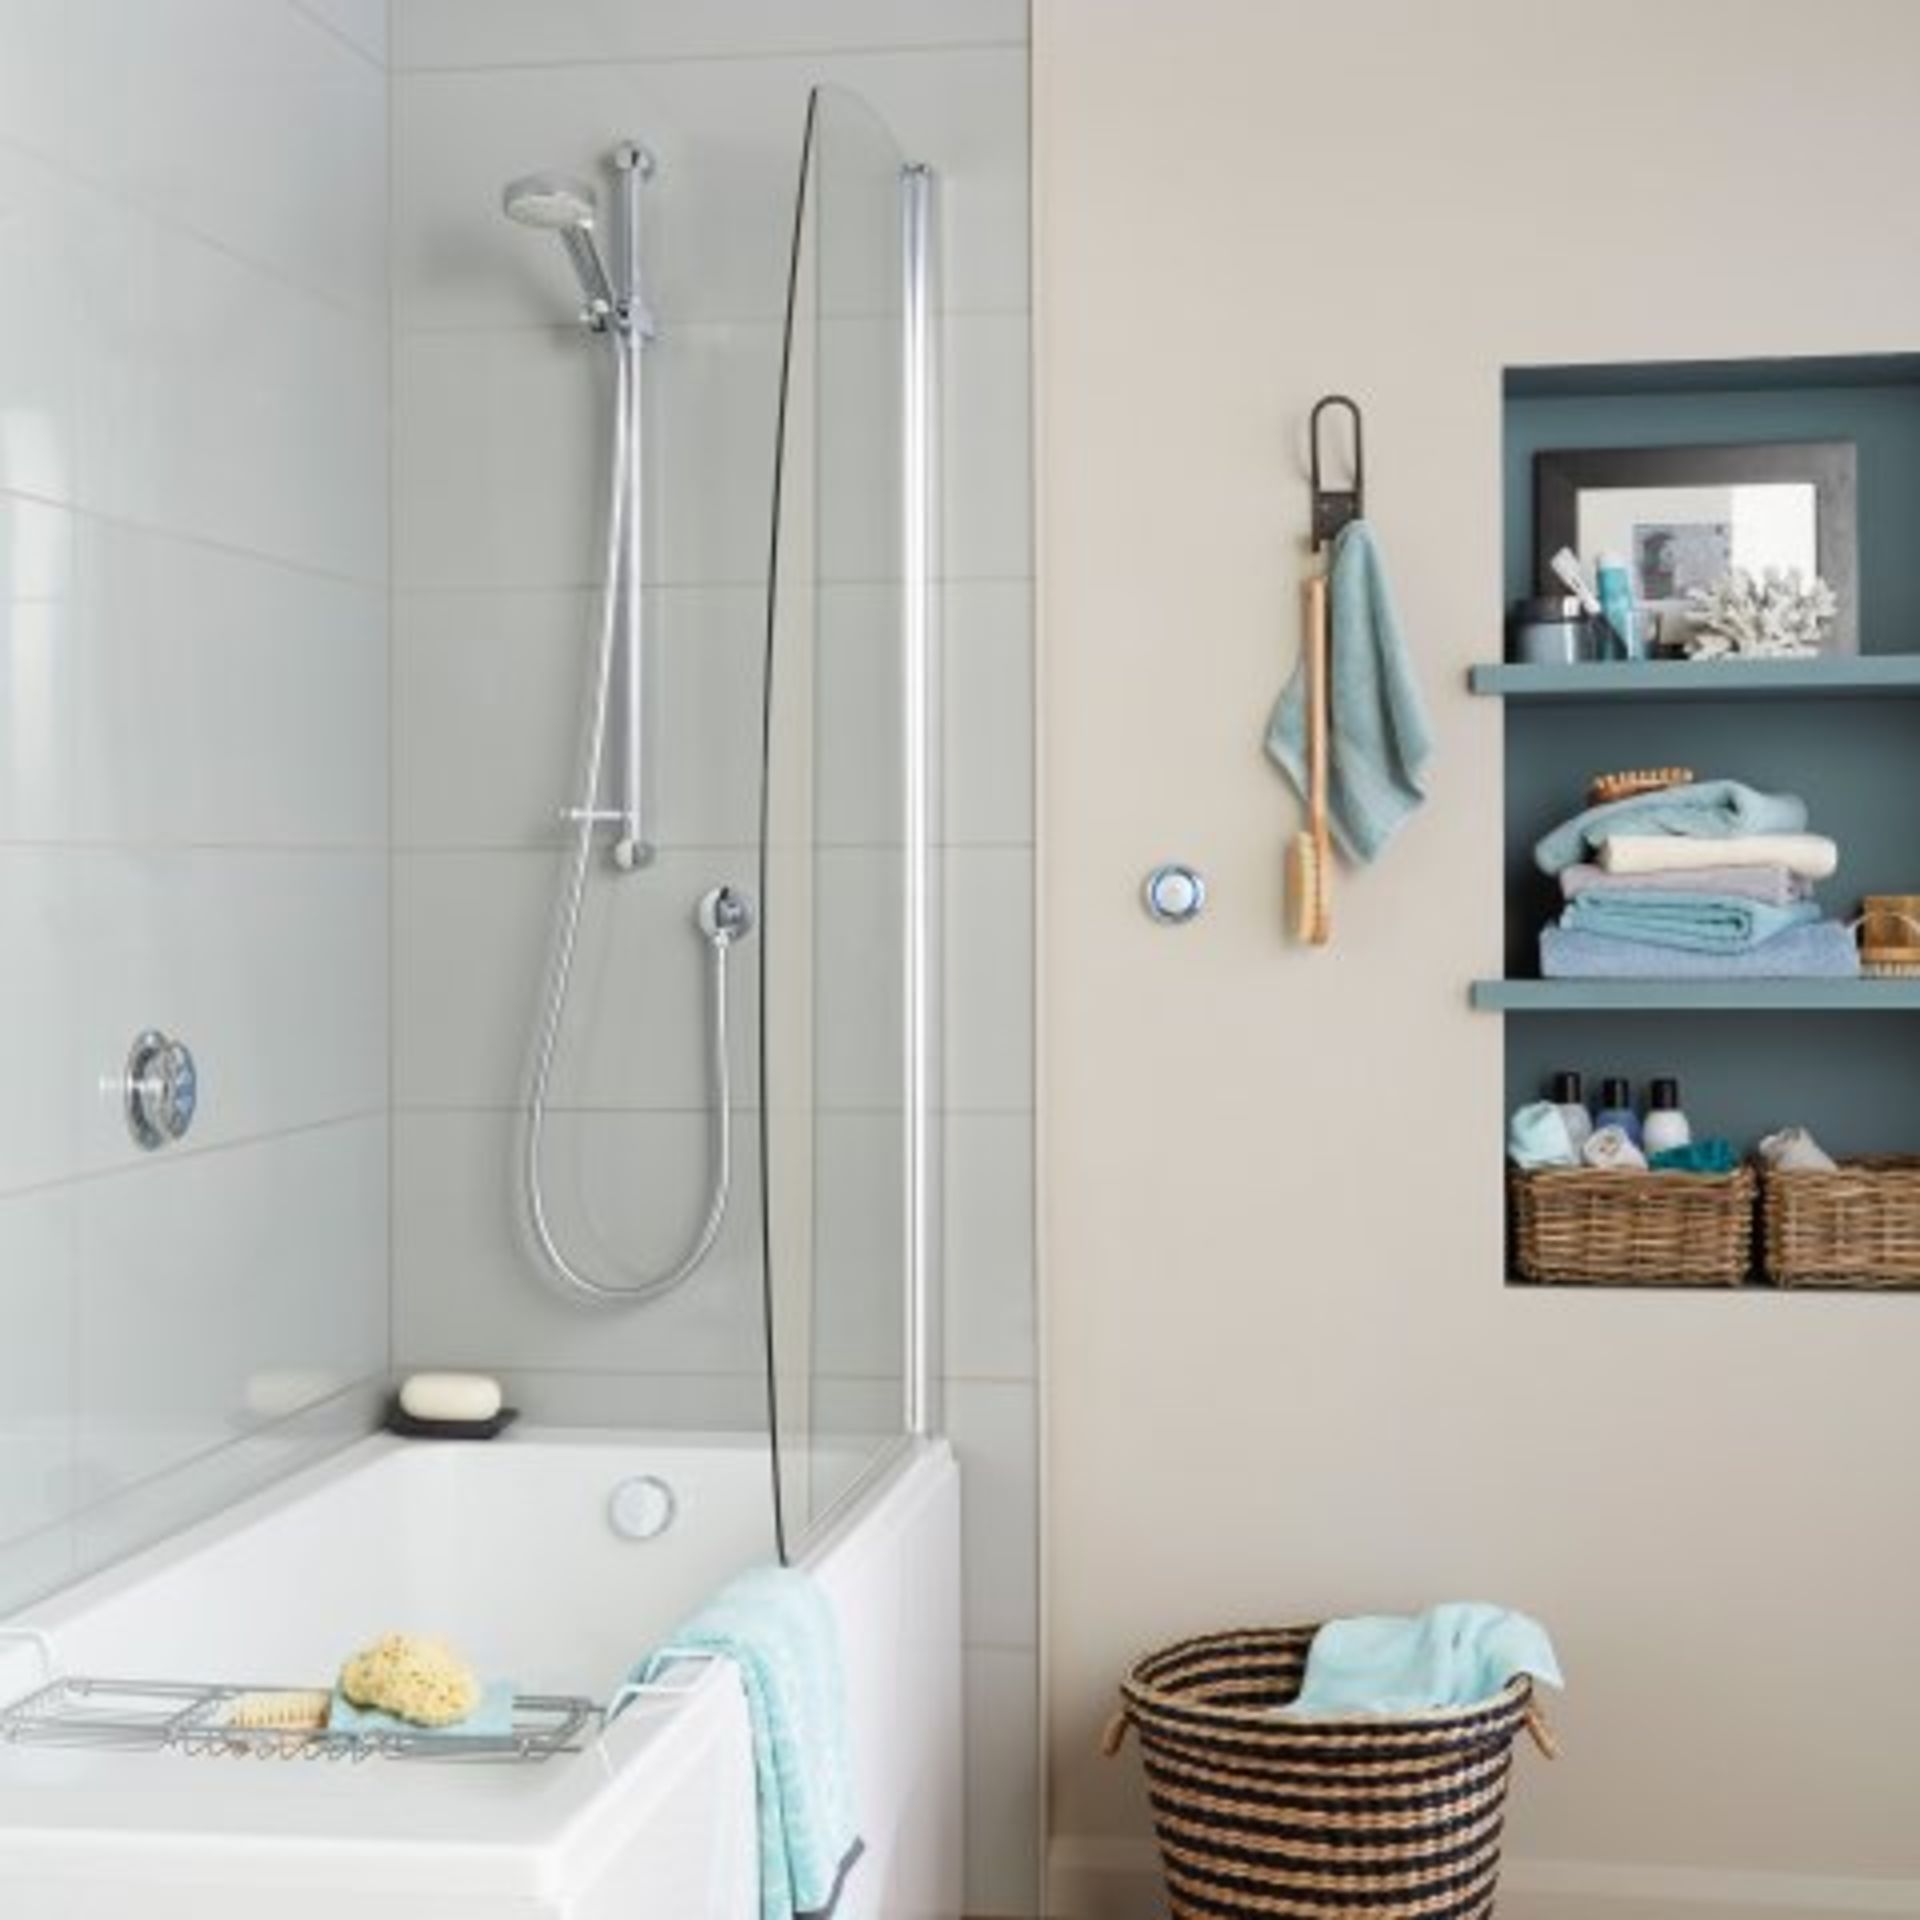 (AA12) Aqualisa Quartz Digital™ Concealed Shower - Pumped. RRP £999.99. Get the convenience and - Image 3 of 5